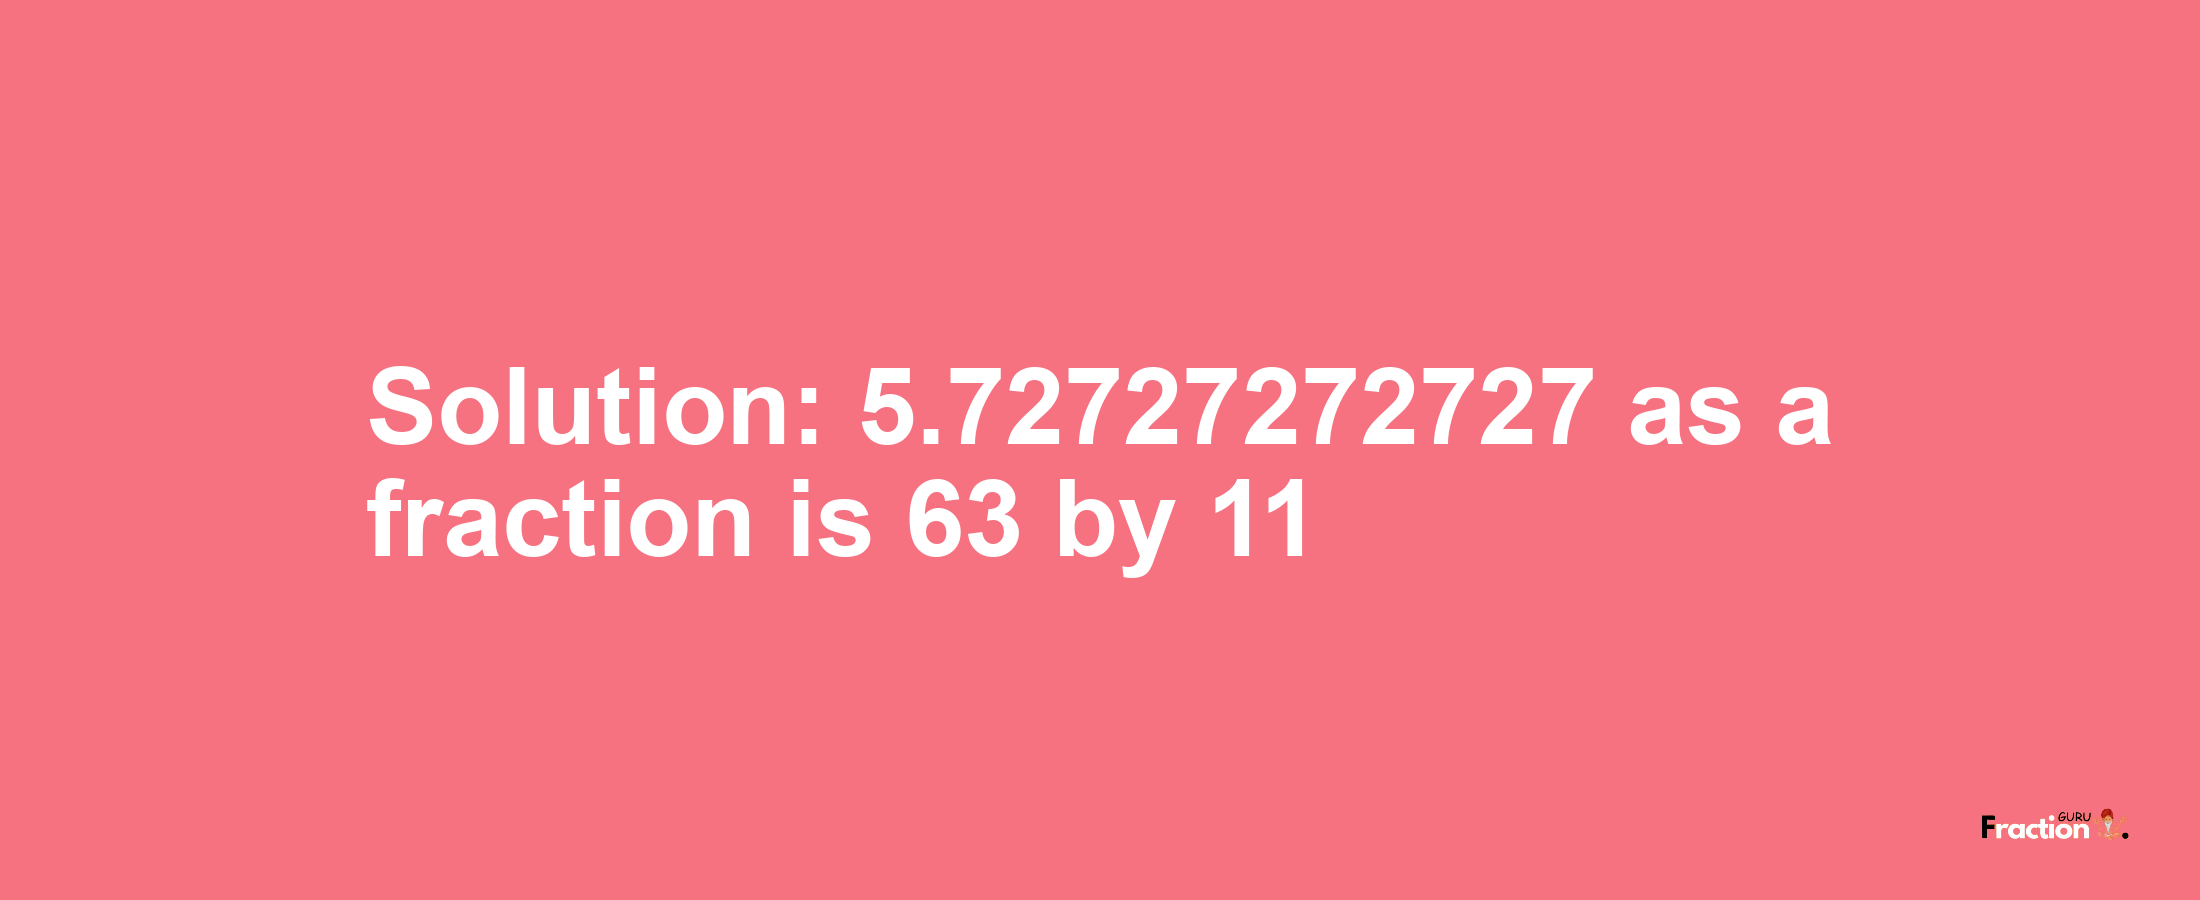 Solution:5.72727272727 as a fraction is 63/11